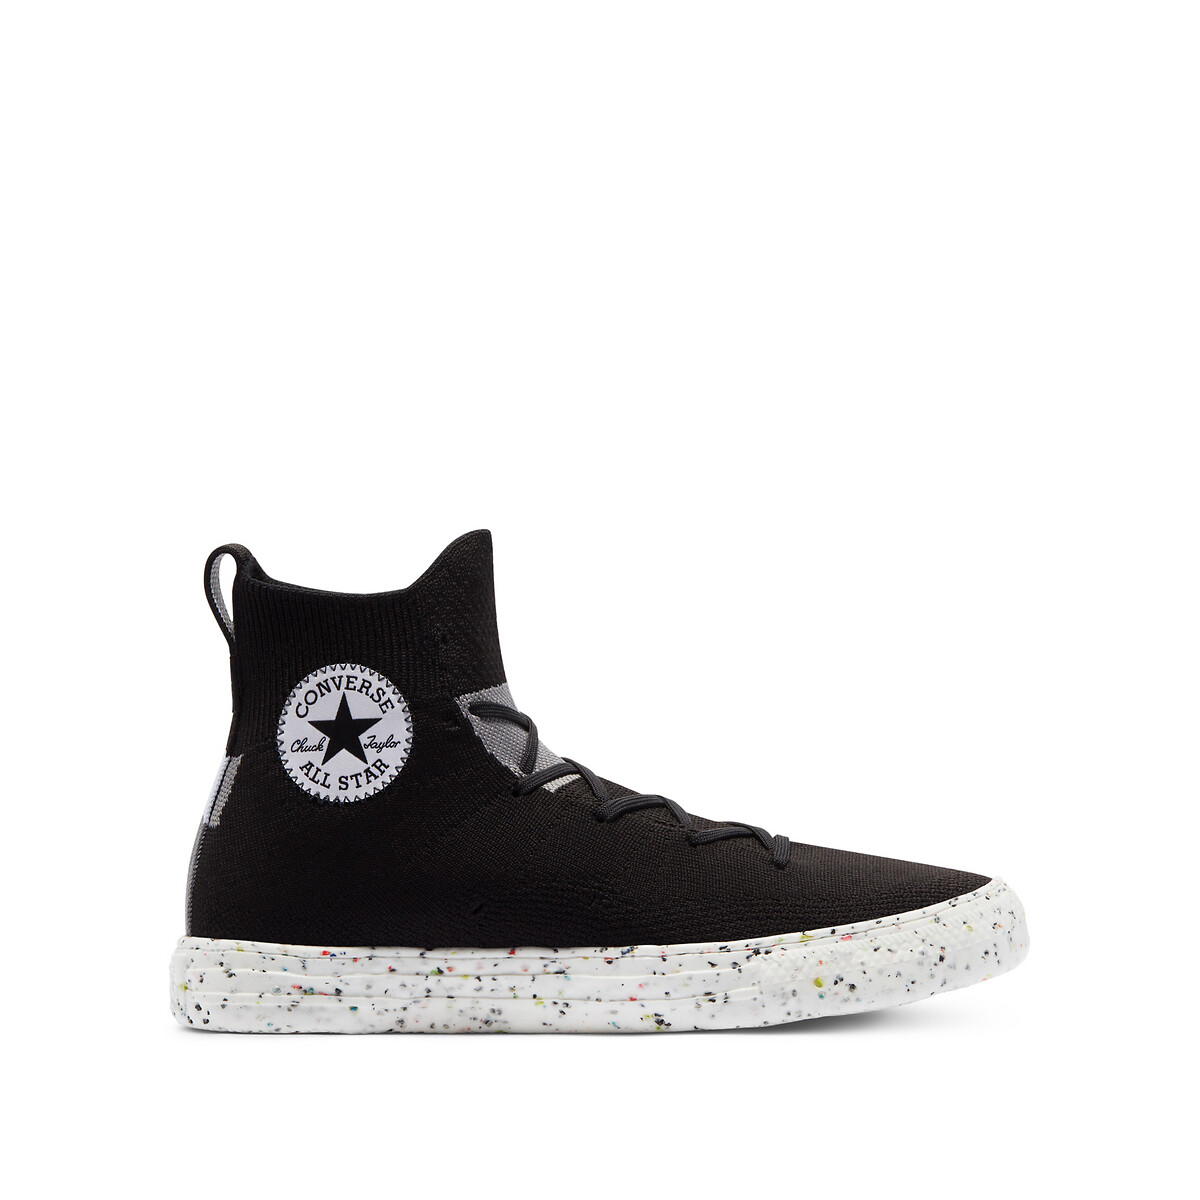 Sapatilhas Chuck Taylor All Star Crater Knit